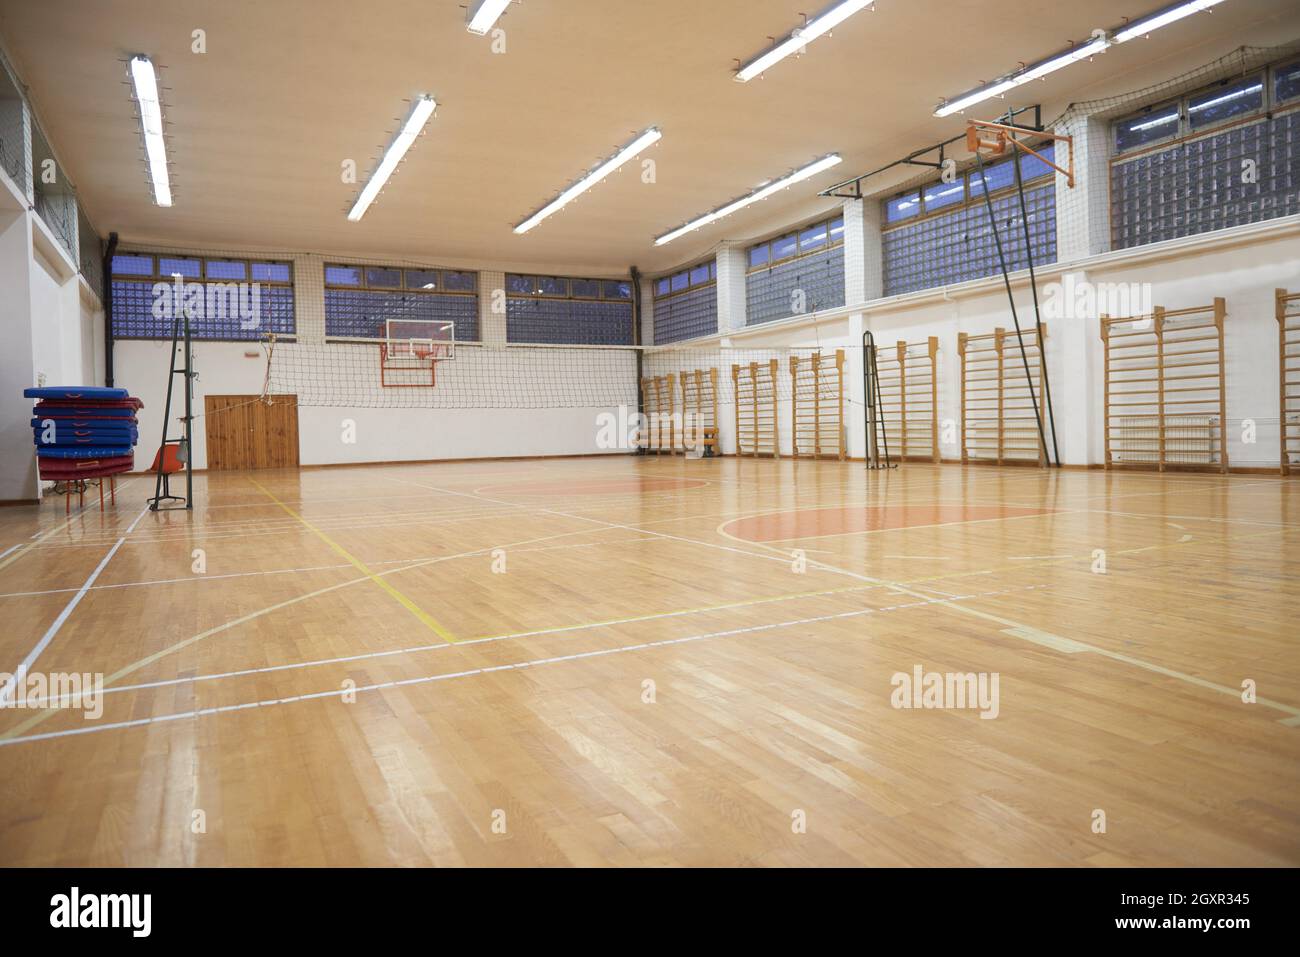 elementary school gym indoor with volleyball net Stock Photo